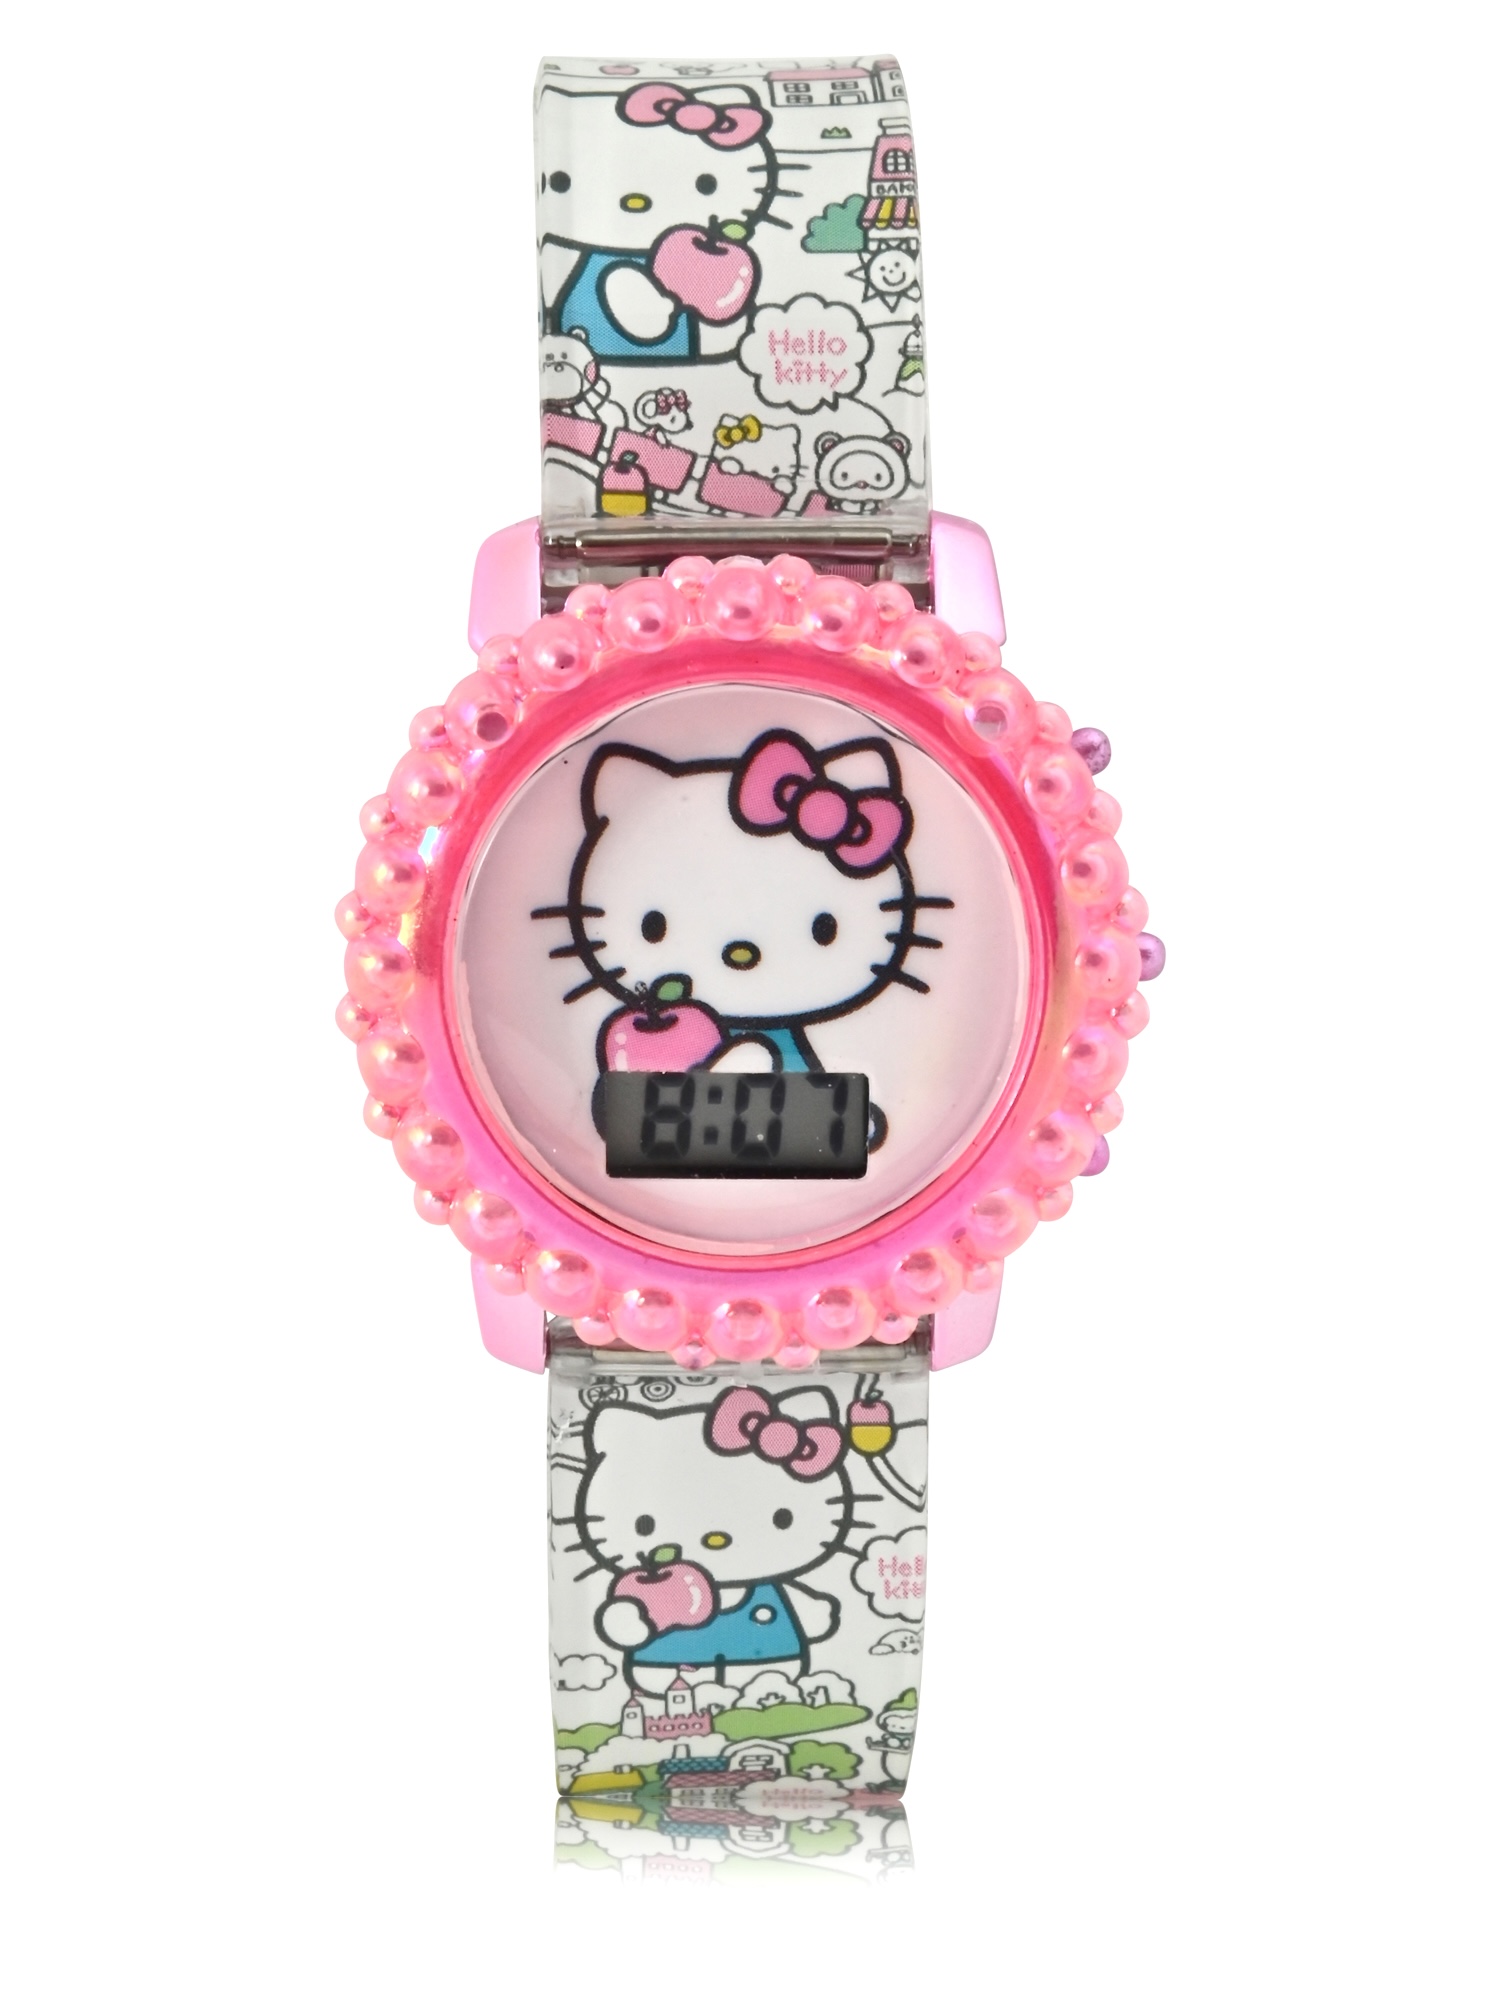 HK4166WM Hello Kitty Kids Molded Case Flashing Lights LCD Watch with Printed Strap - image 3 of 3